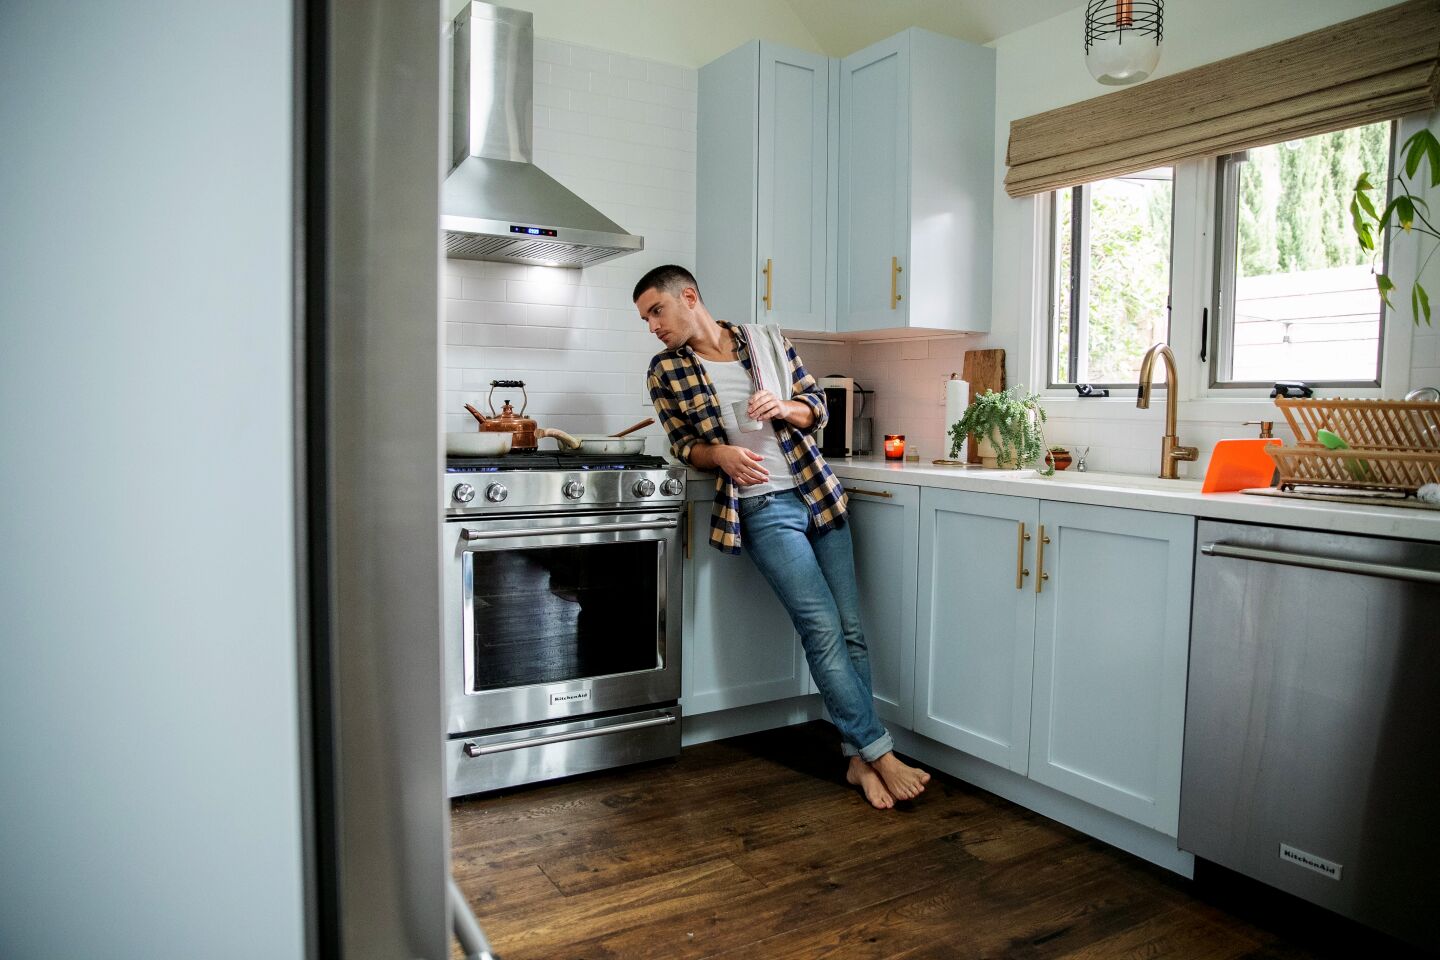 Actor Ronen Rubinstein finds that cooking in his light-filled kitchen helps him keep a positive attitude as he isolates at home.